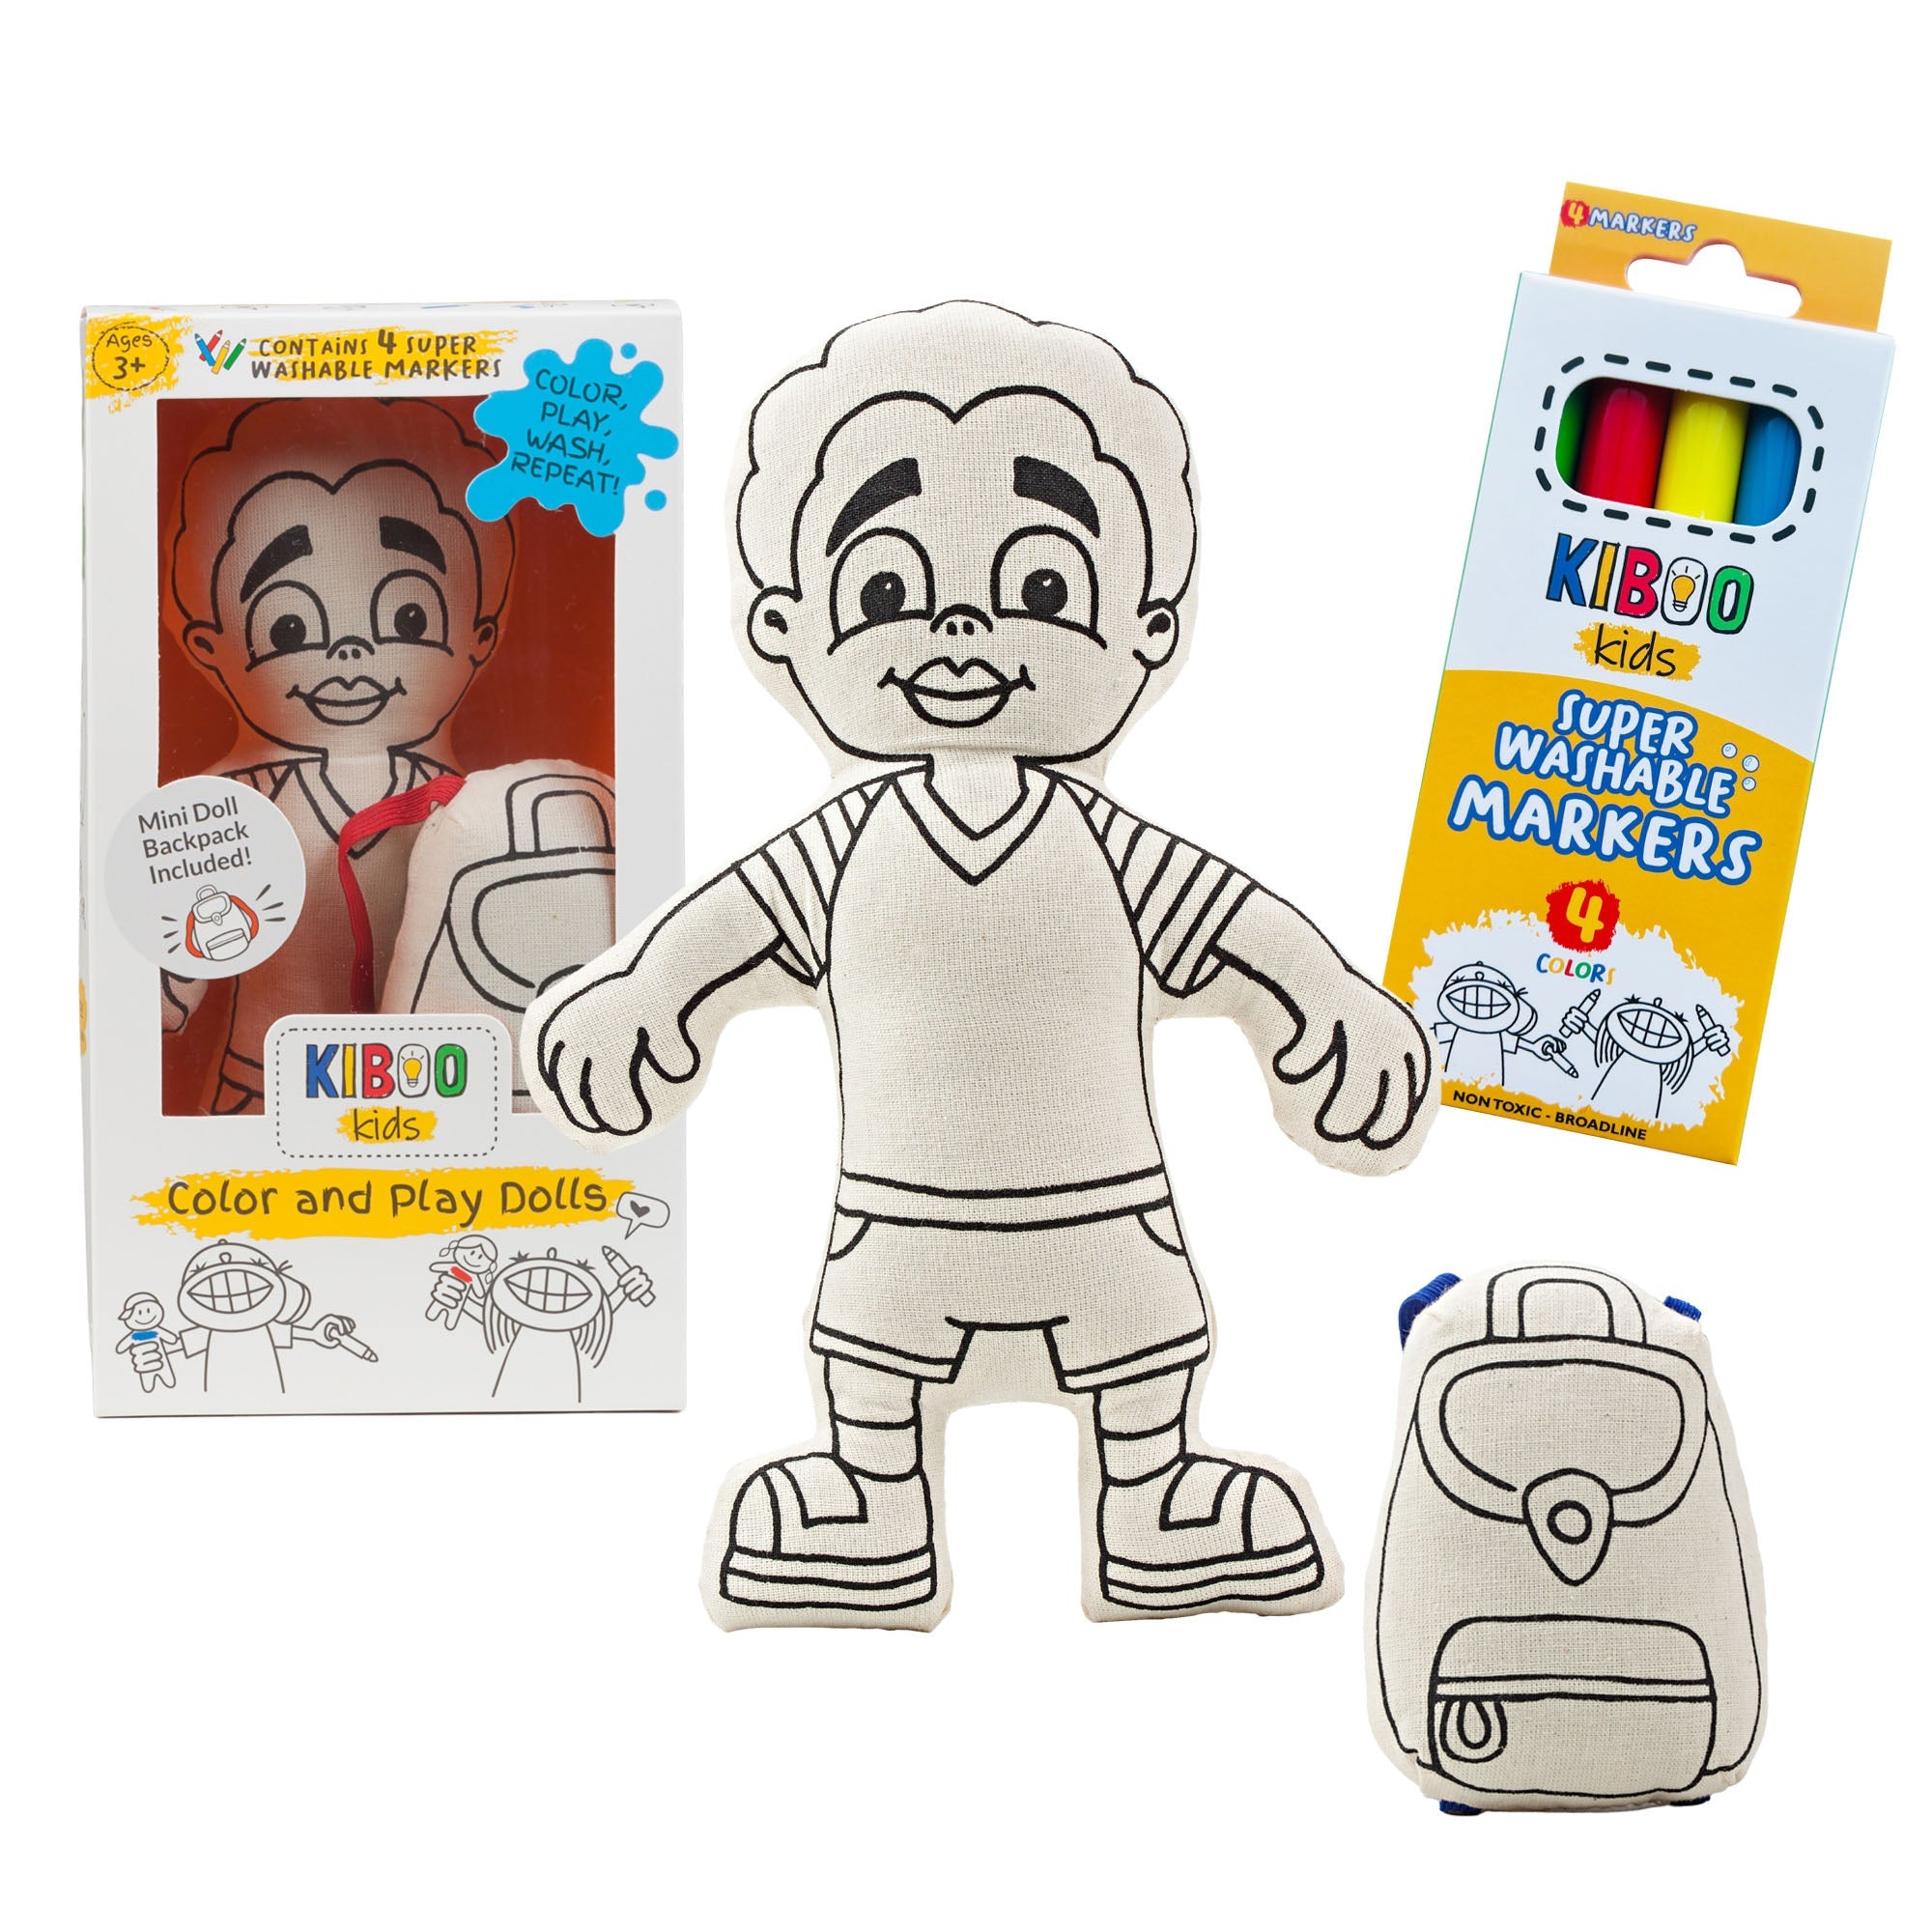 Kiboo Kids: Boy With Striped T-shirt - Colorable And Washable Doll For Creative Play